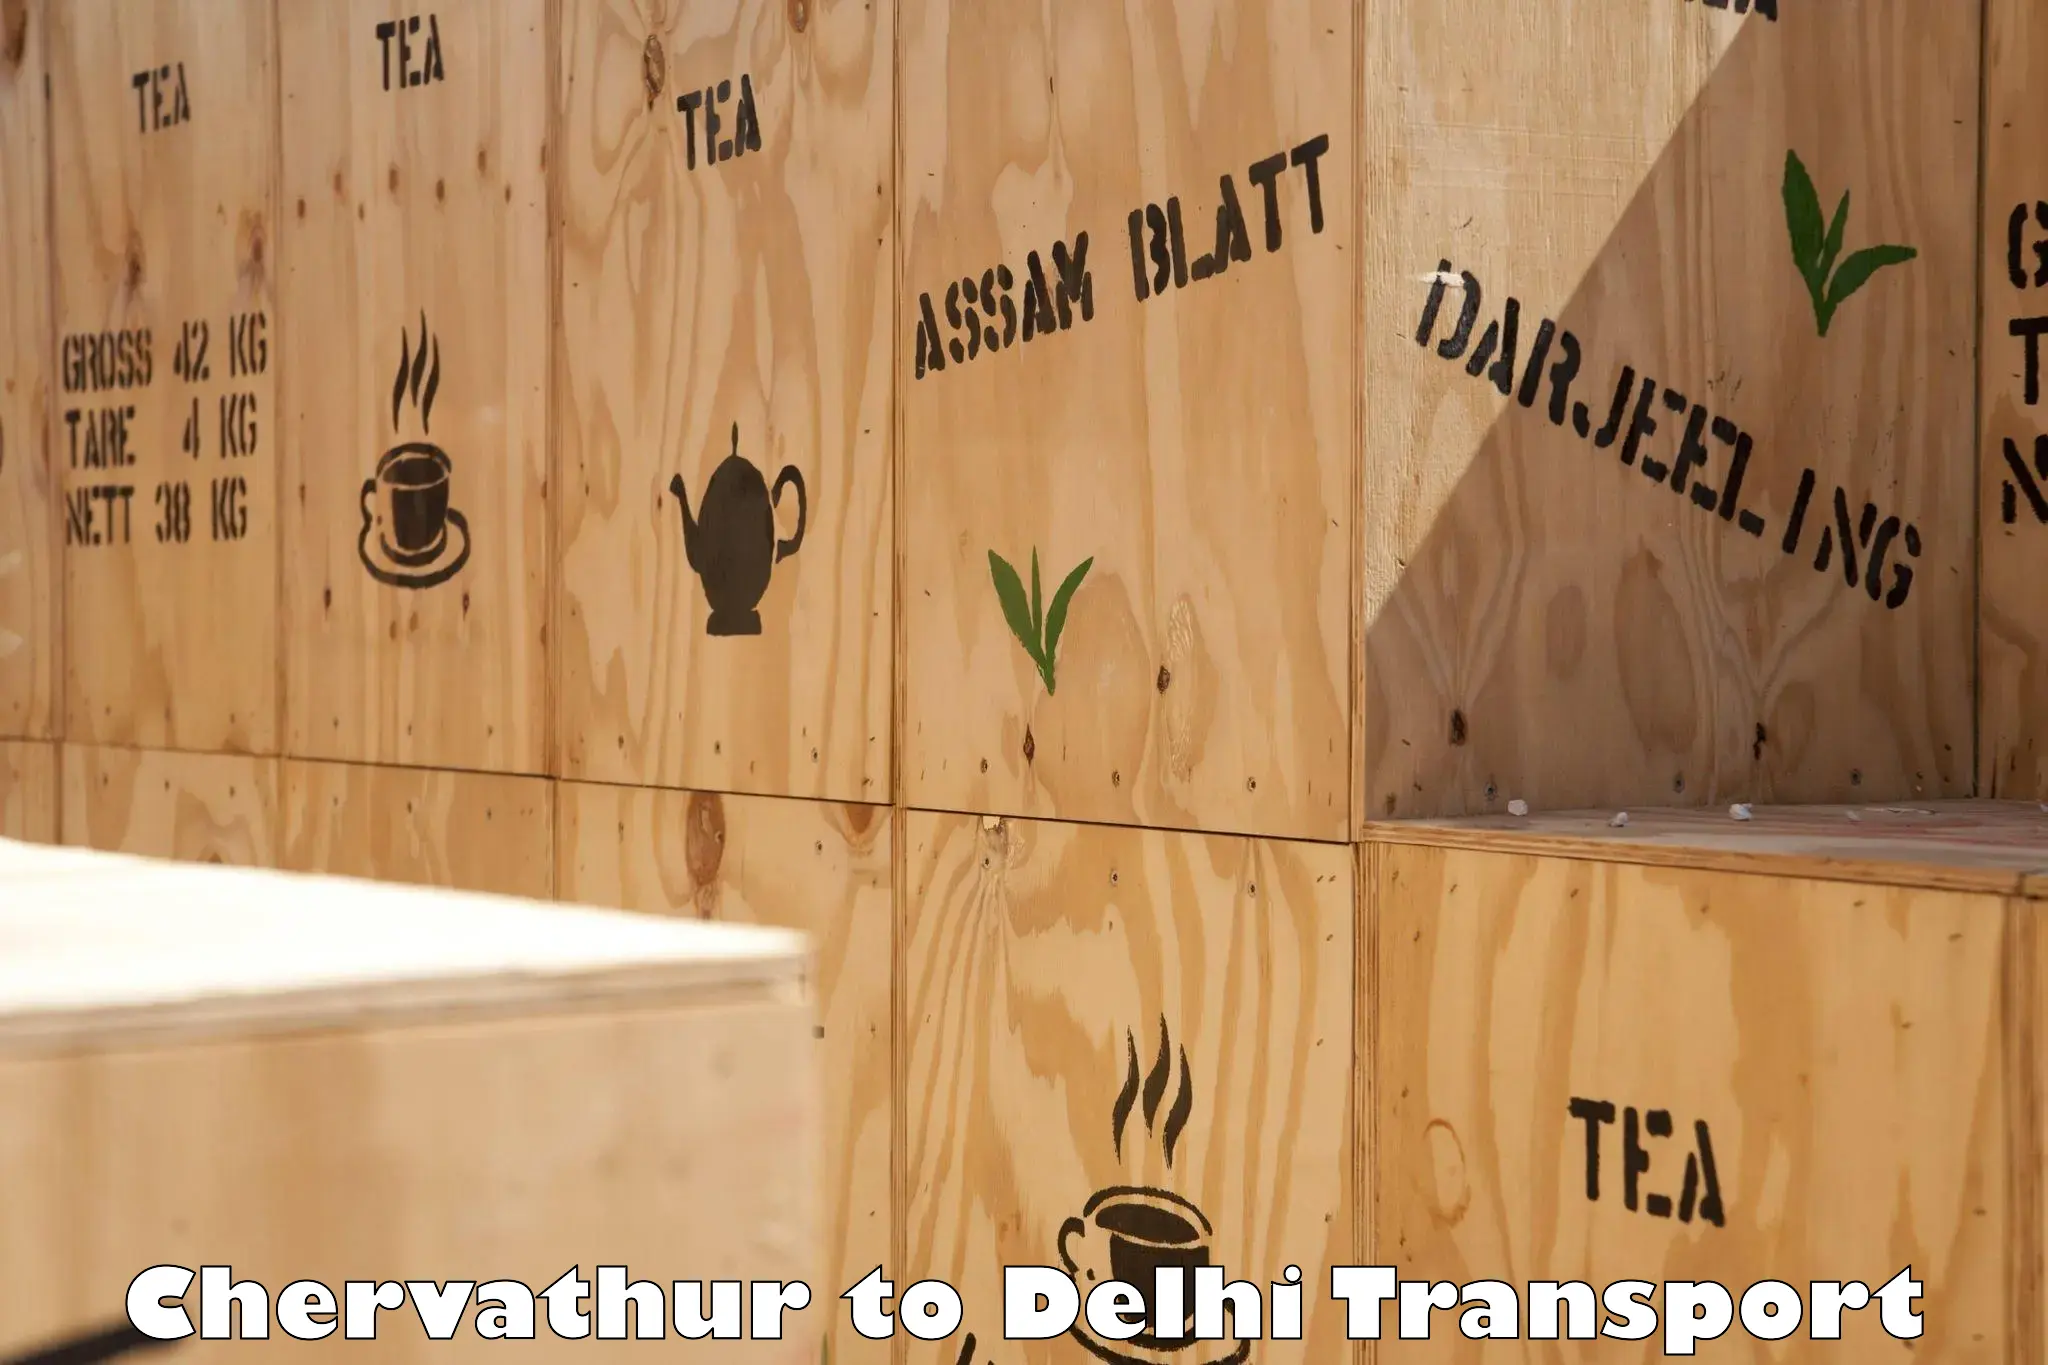 Container transportation services in Chervathur to Krishna Nagar